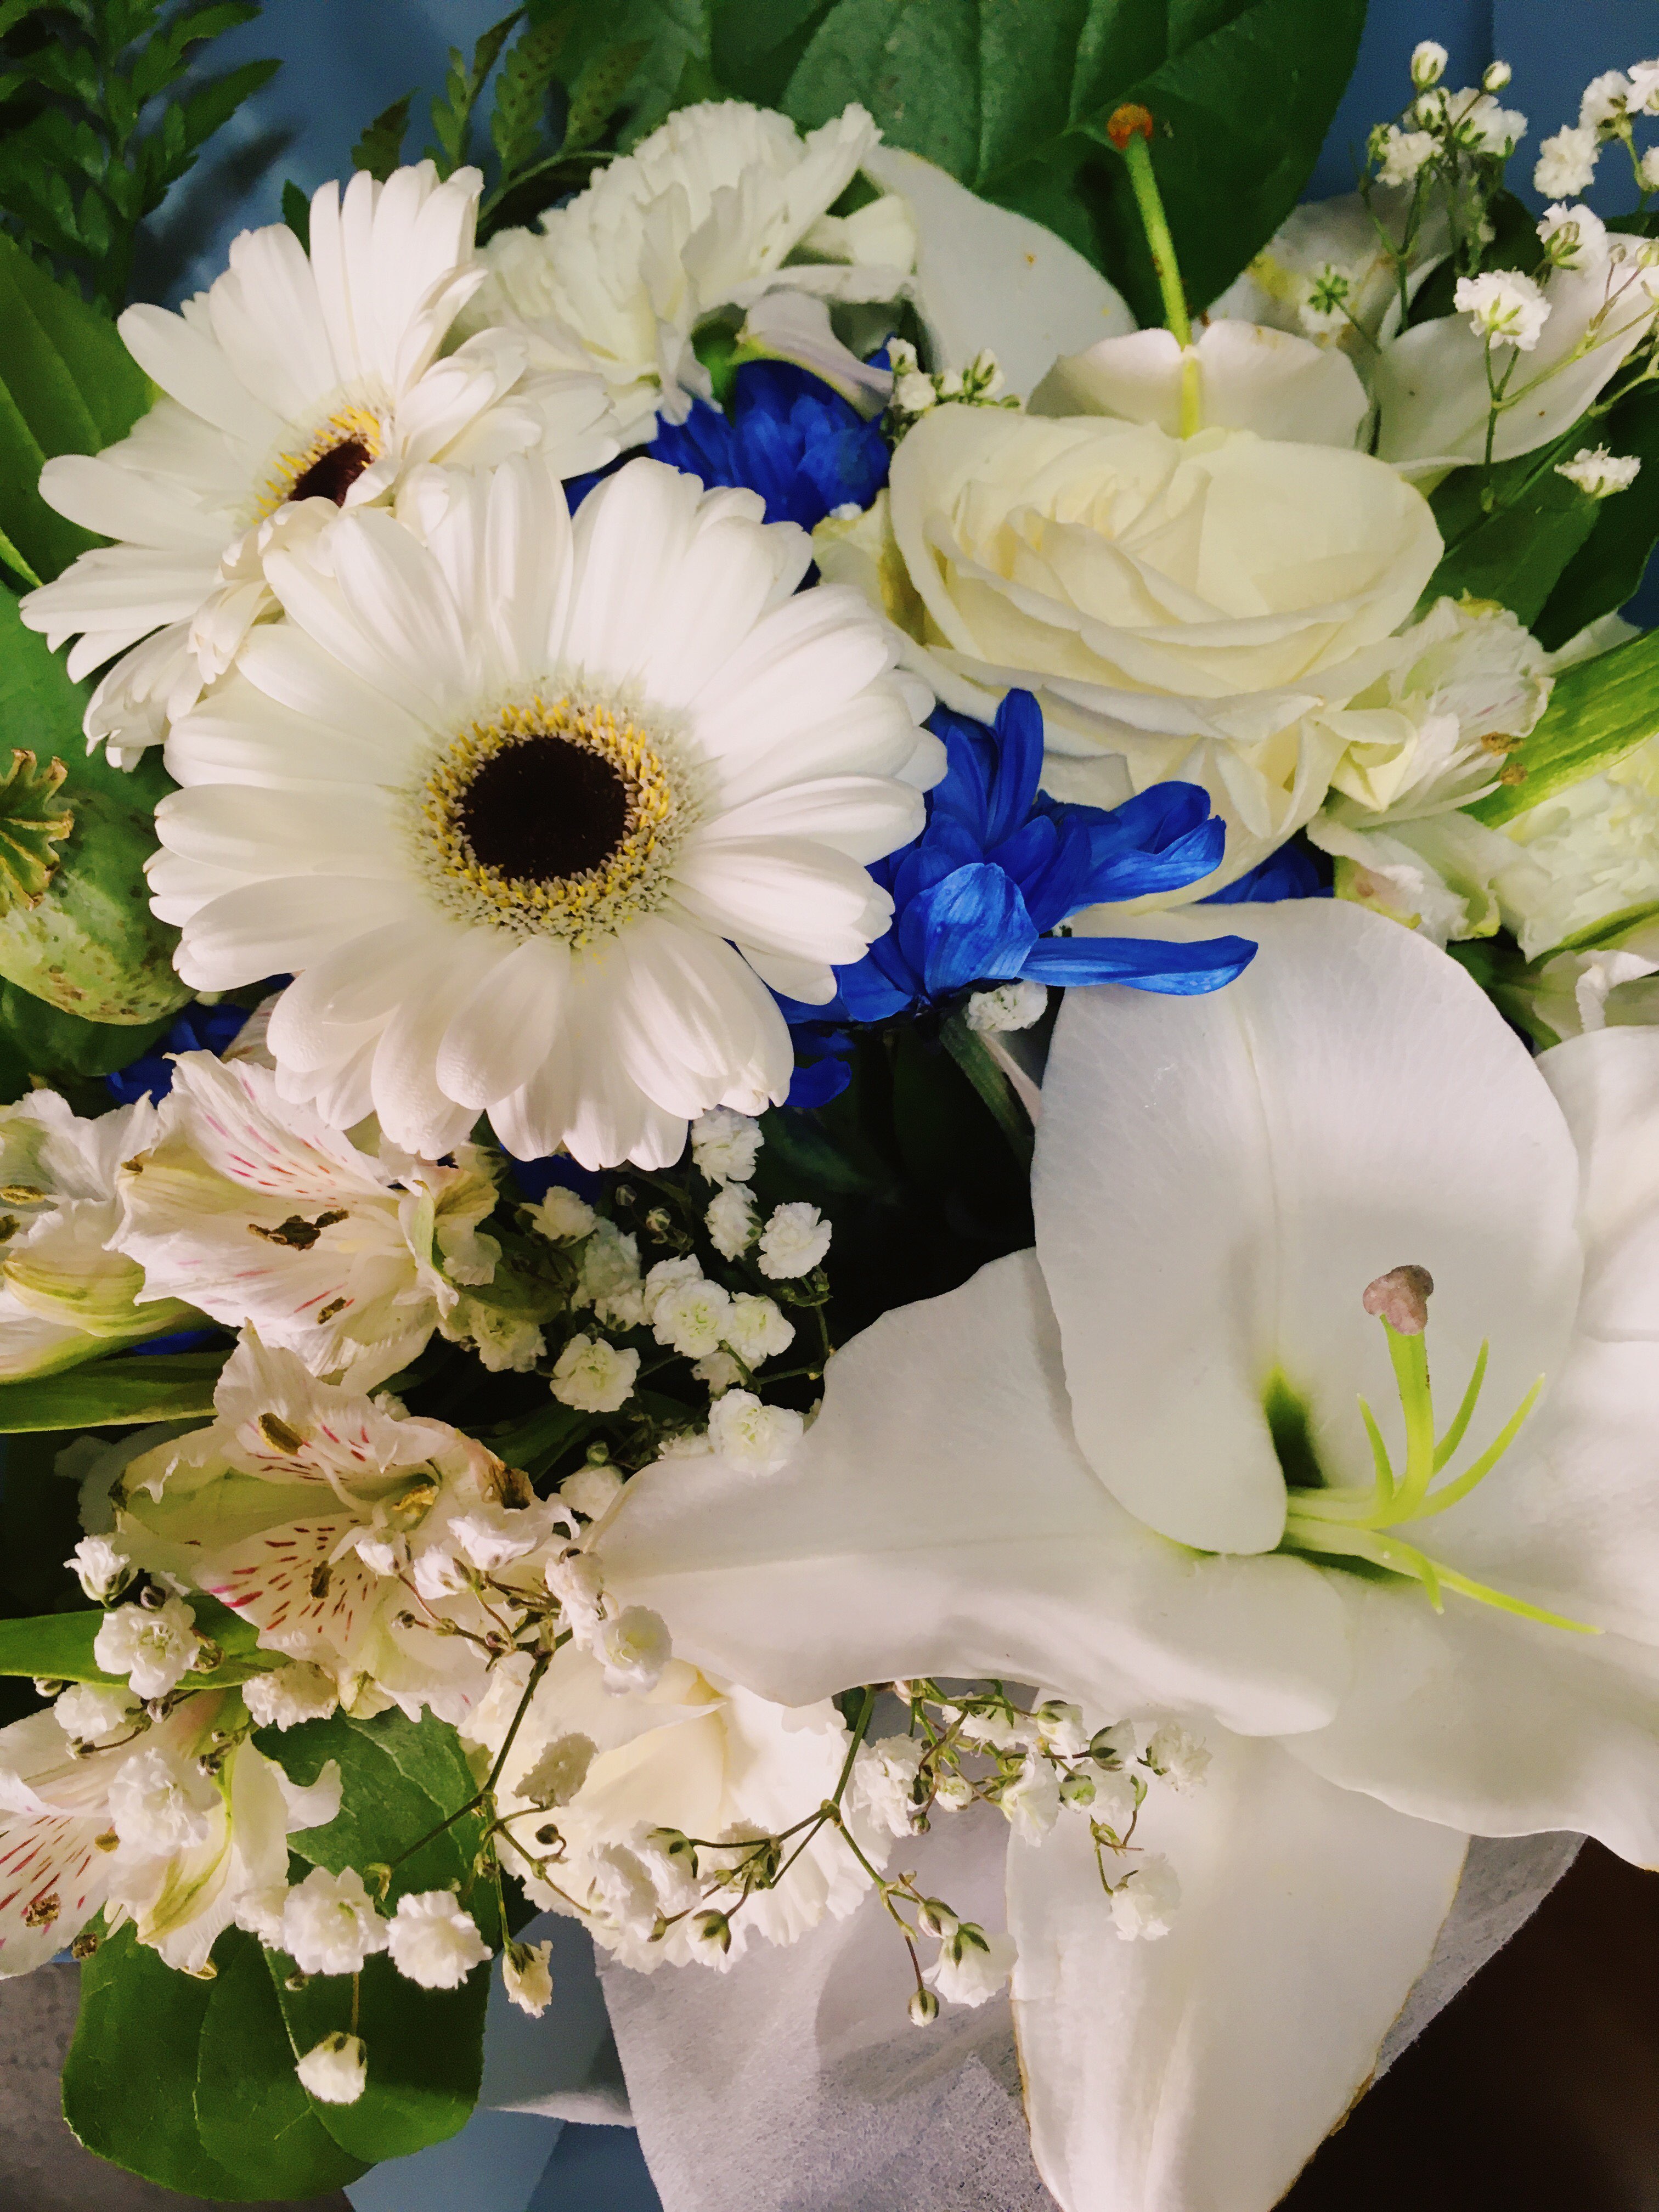 A bouquet of white and blue flowers.